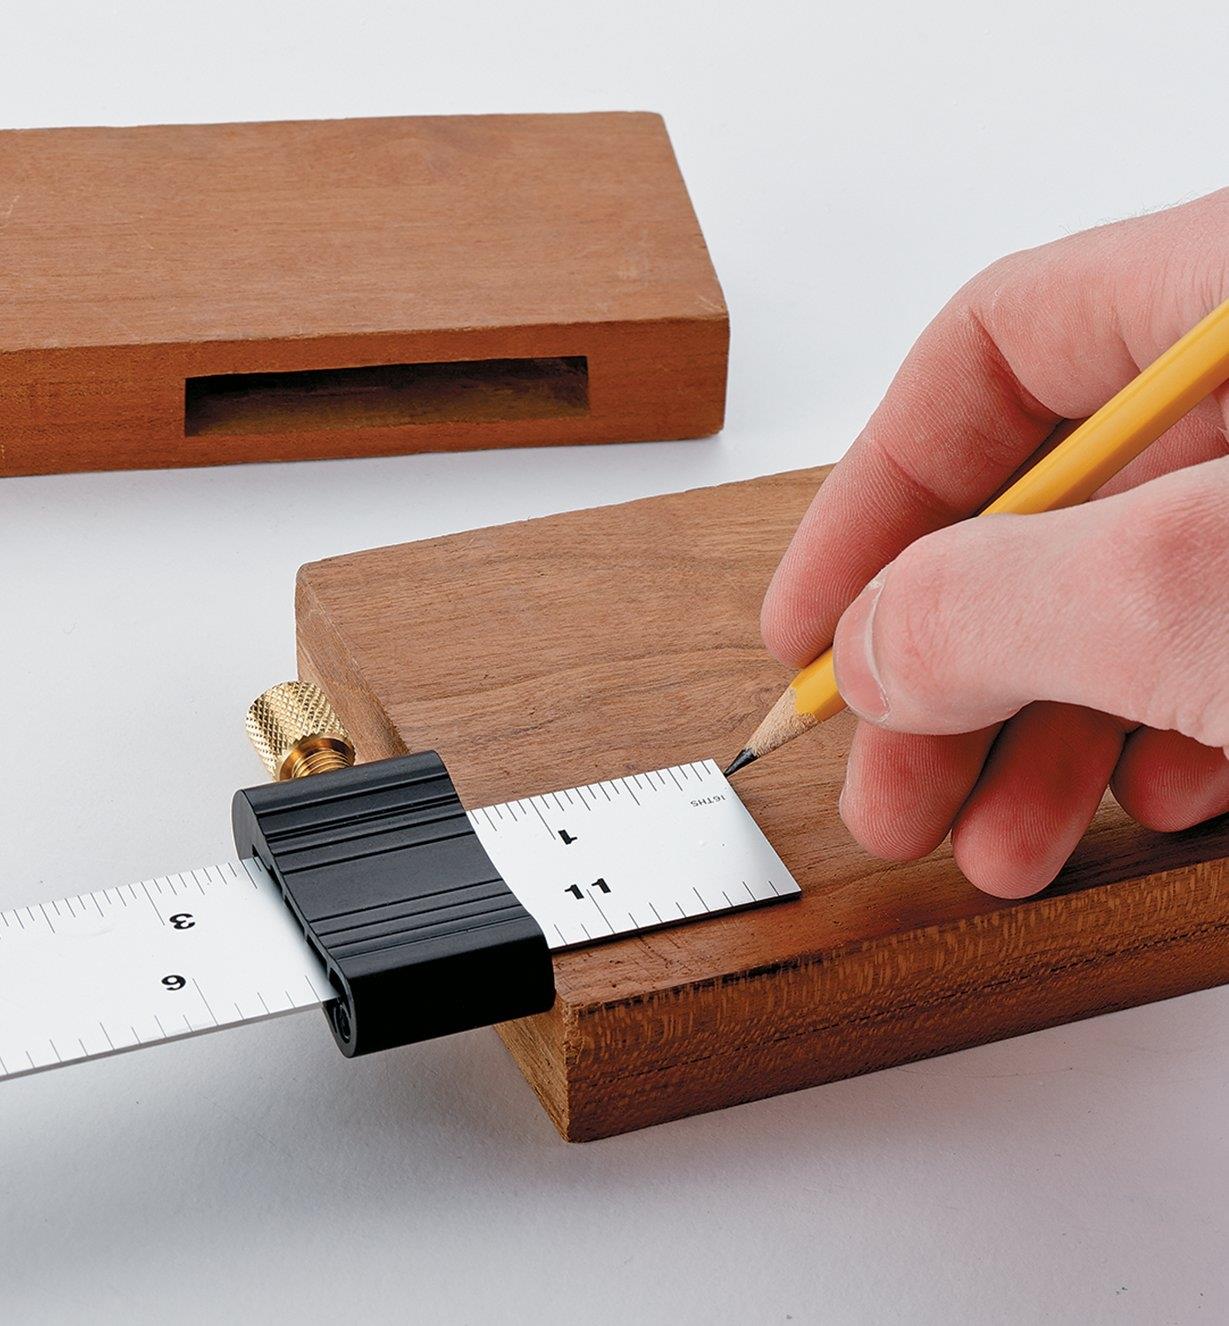 Using a ruler stop attached to a steel rule to mark out the depth of a mortise on a piece of wood